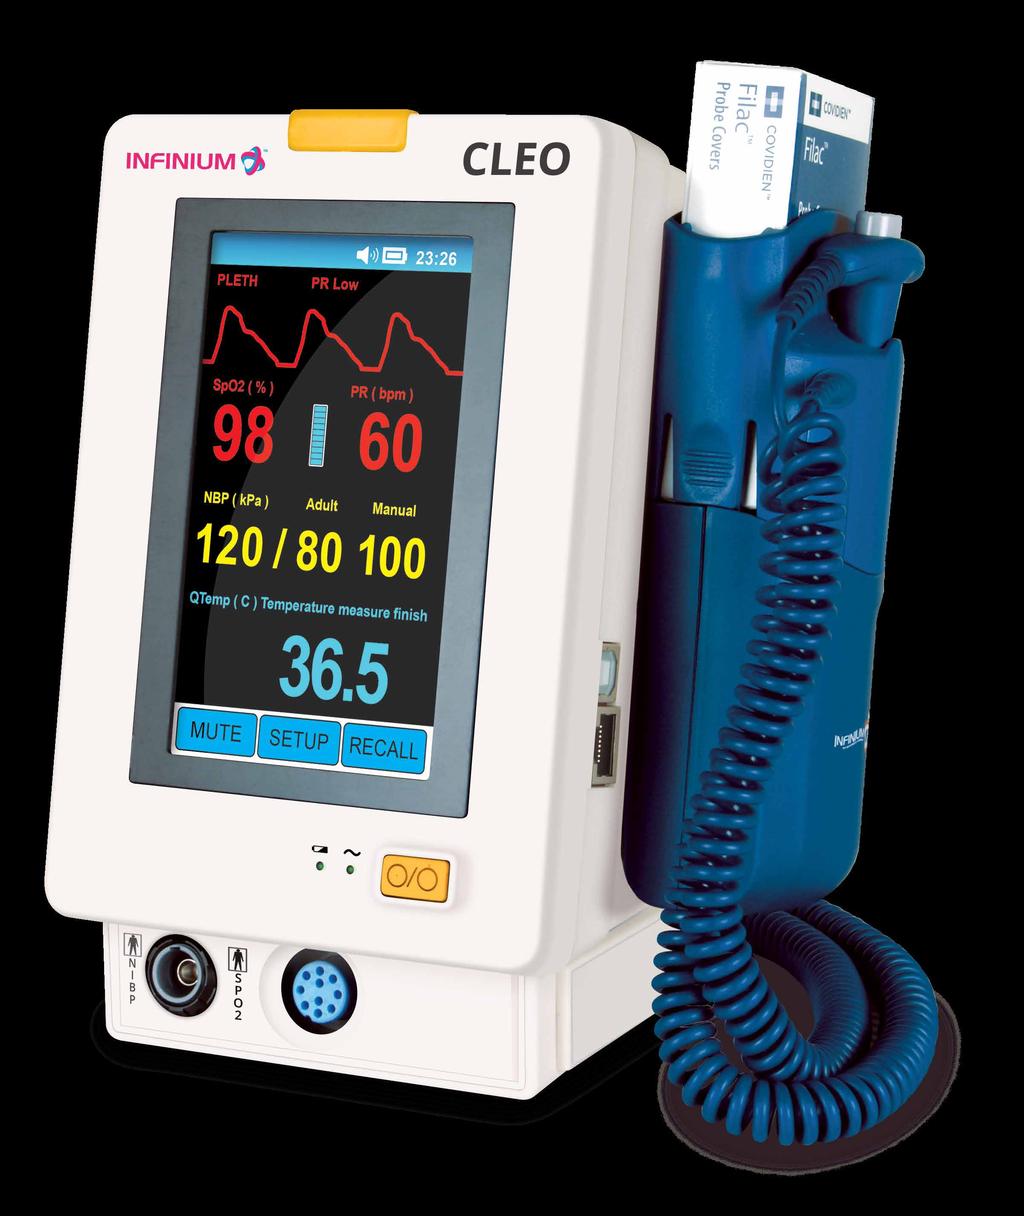 CLEO TM CLEO Vital Signs Monitor Versatility In Vital Signs n Blood Pressure n SPO2 n Rapid Oral Temperature n Touch Screen n Light Weight n Portable with Battery Backup n Mountable on Rolling Stand,